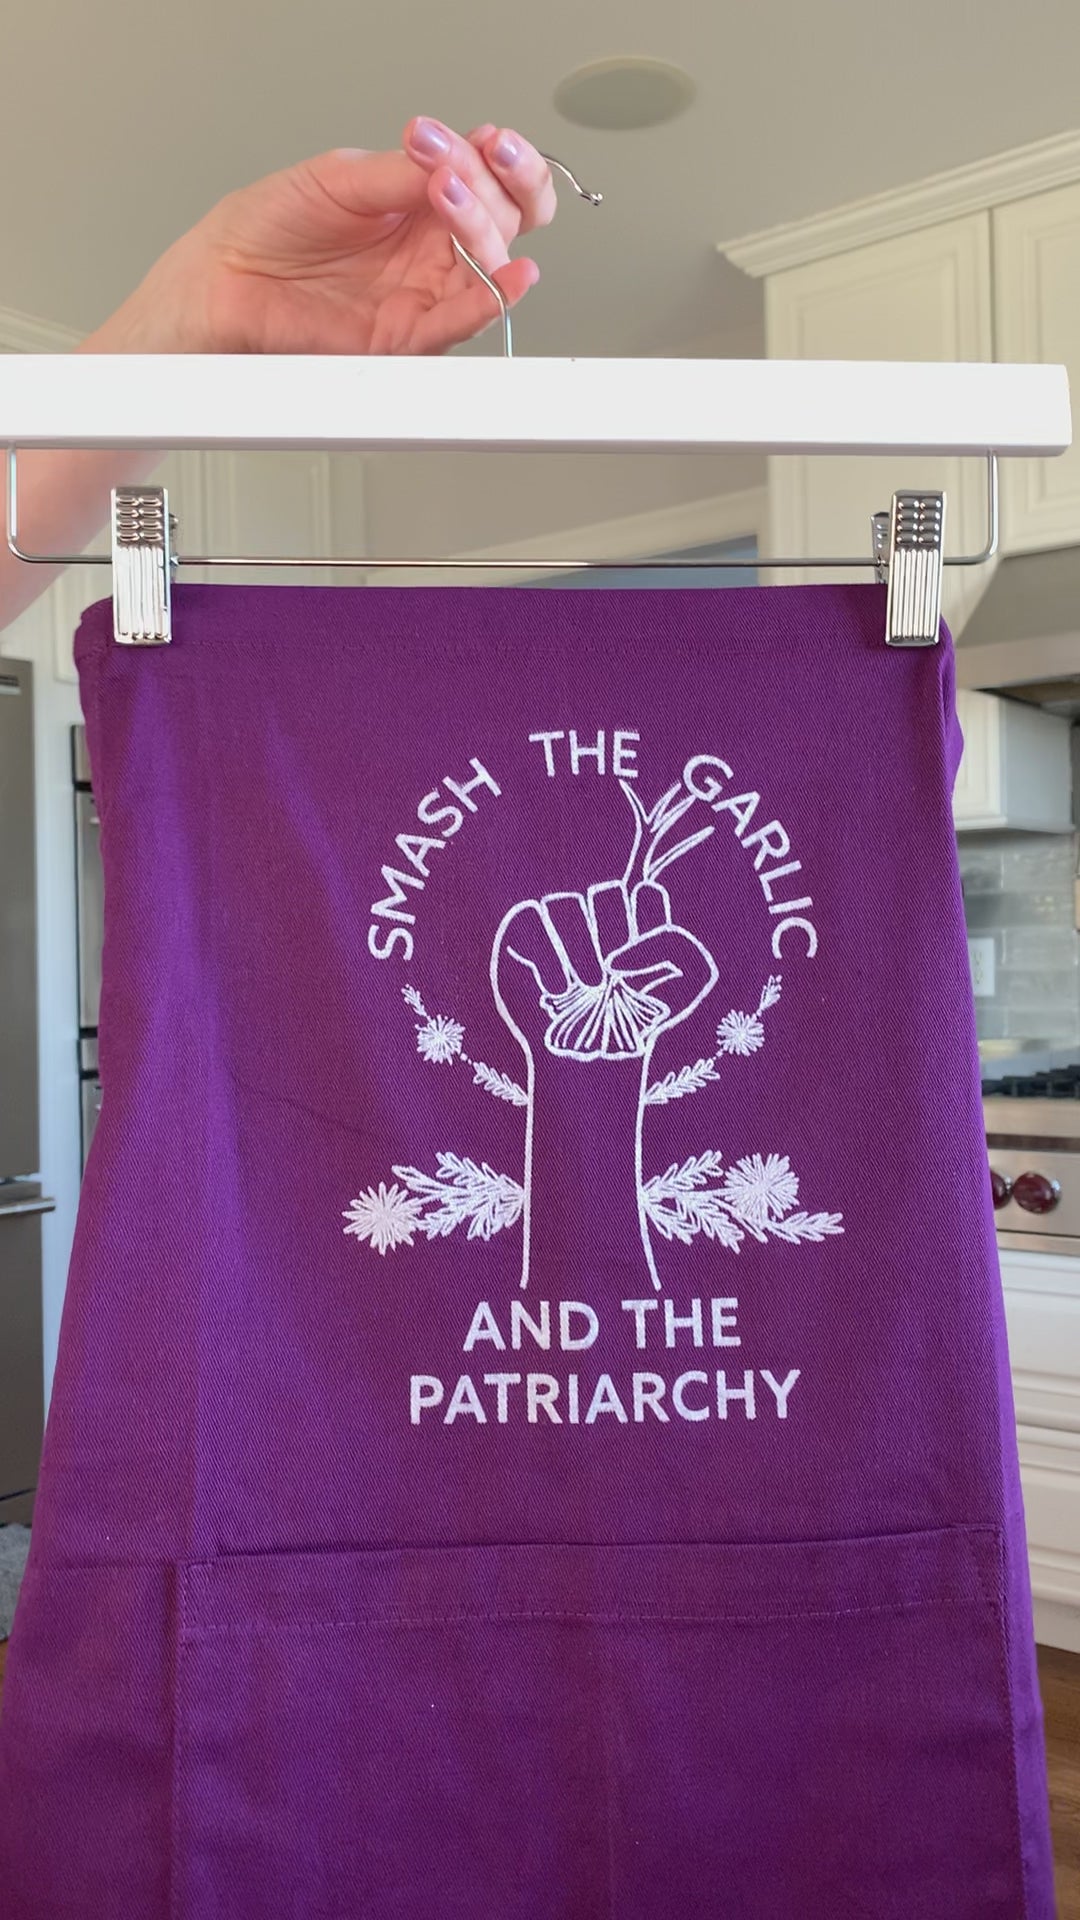 A dark purple "Smash the Garlic and the Patriarchy" plus size apron hangs on a hanger